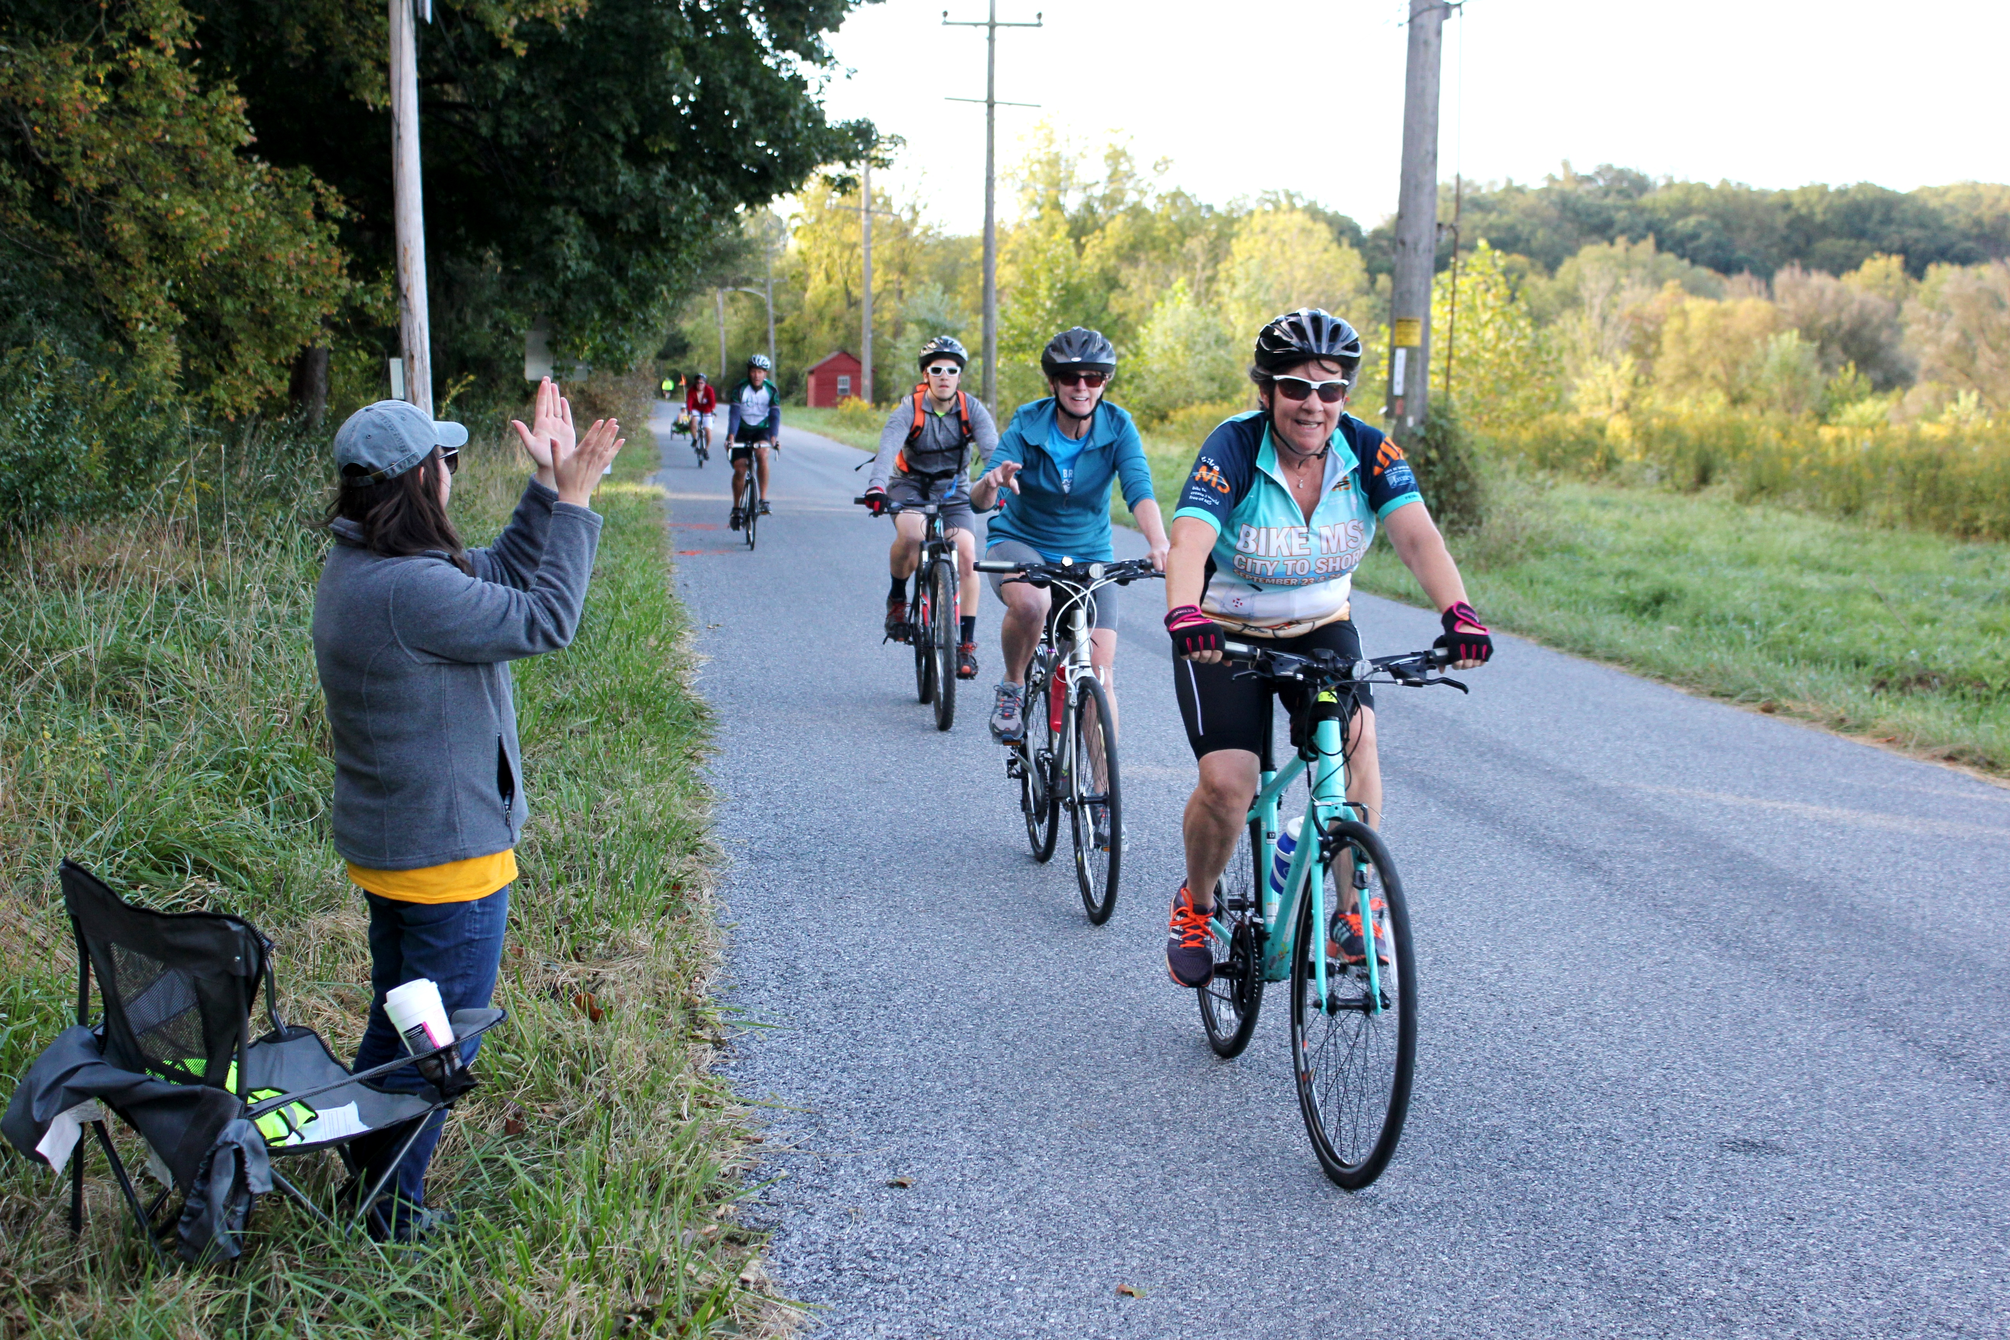 Cyclists traveling along road during "Bike the Brandywine" event and being cheered on by a bystander